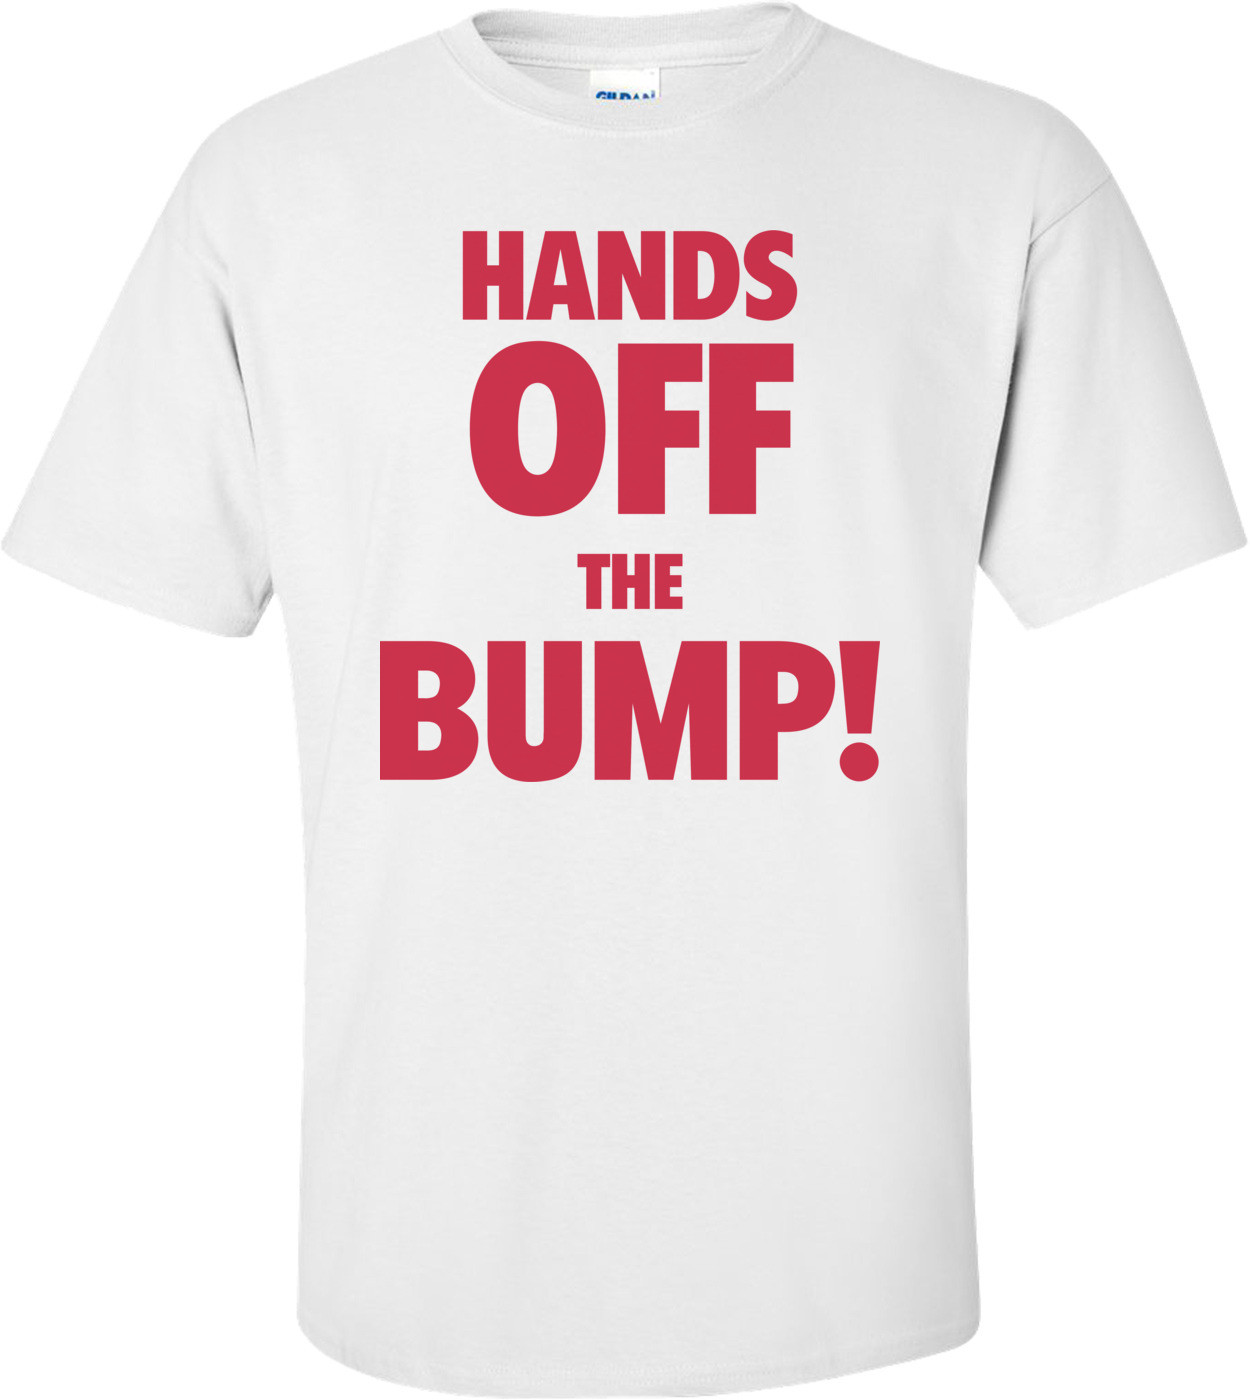 Hands Off The Bump! Funny Maternity Shirt